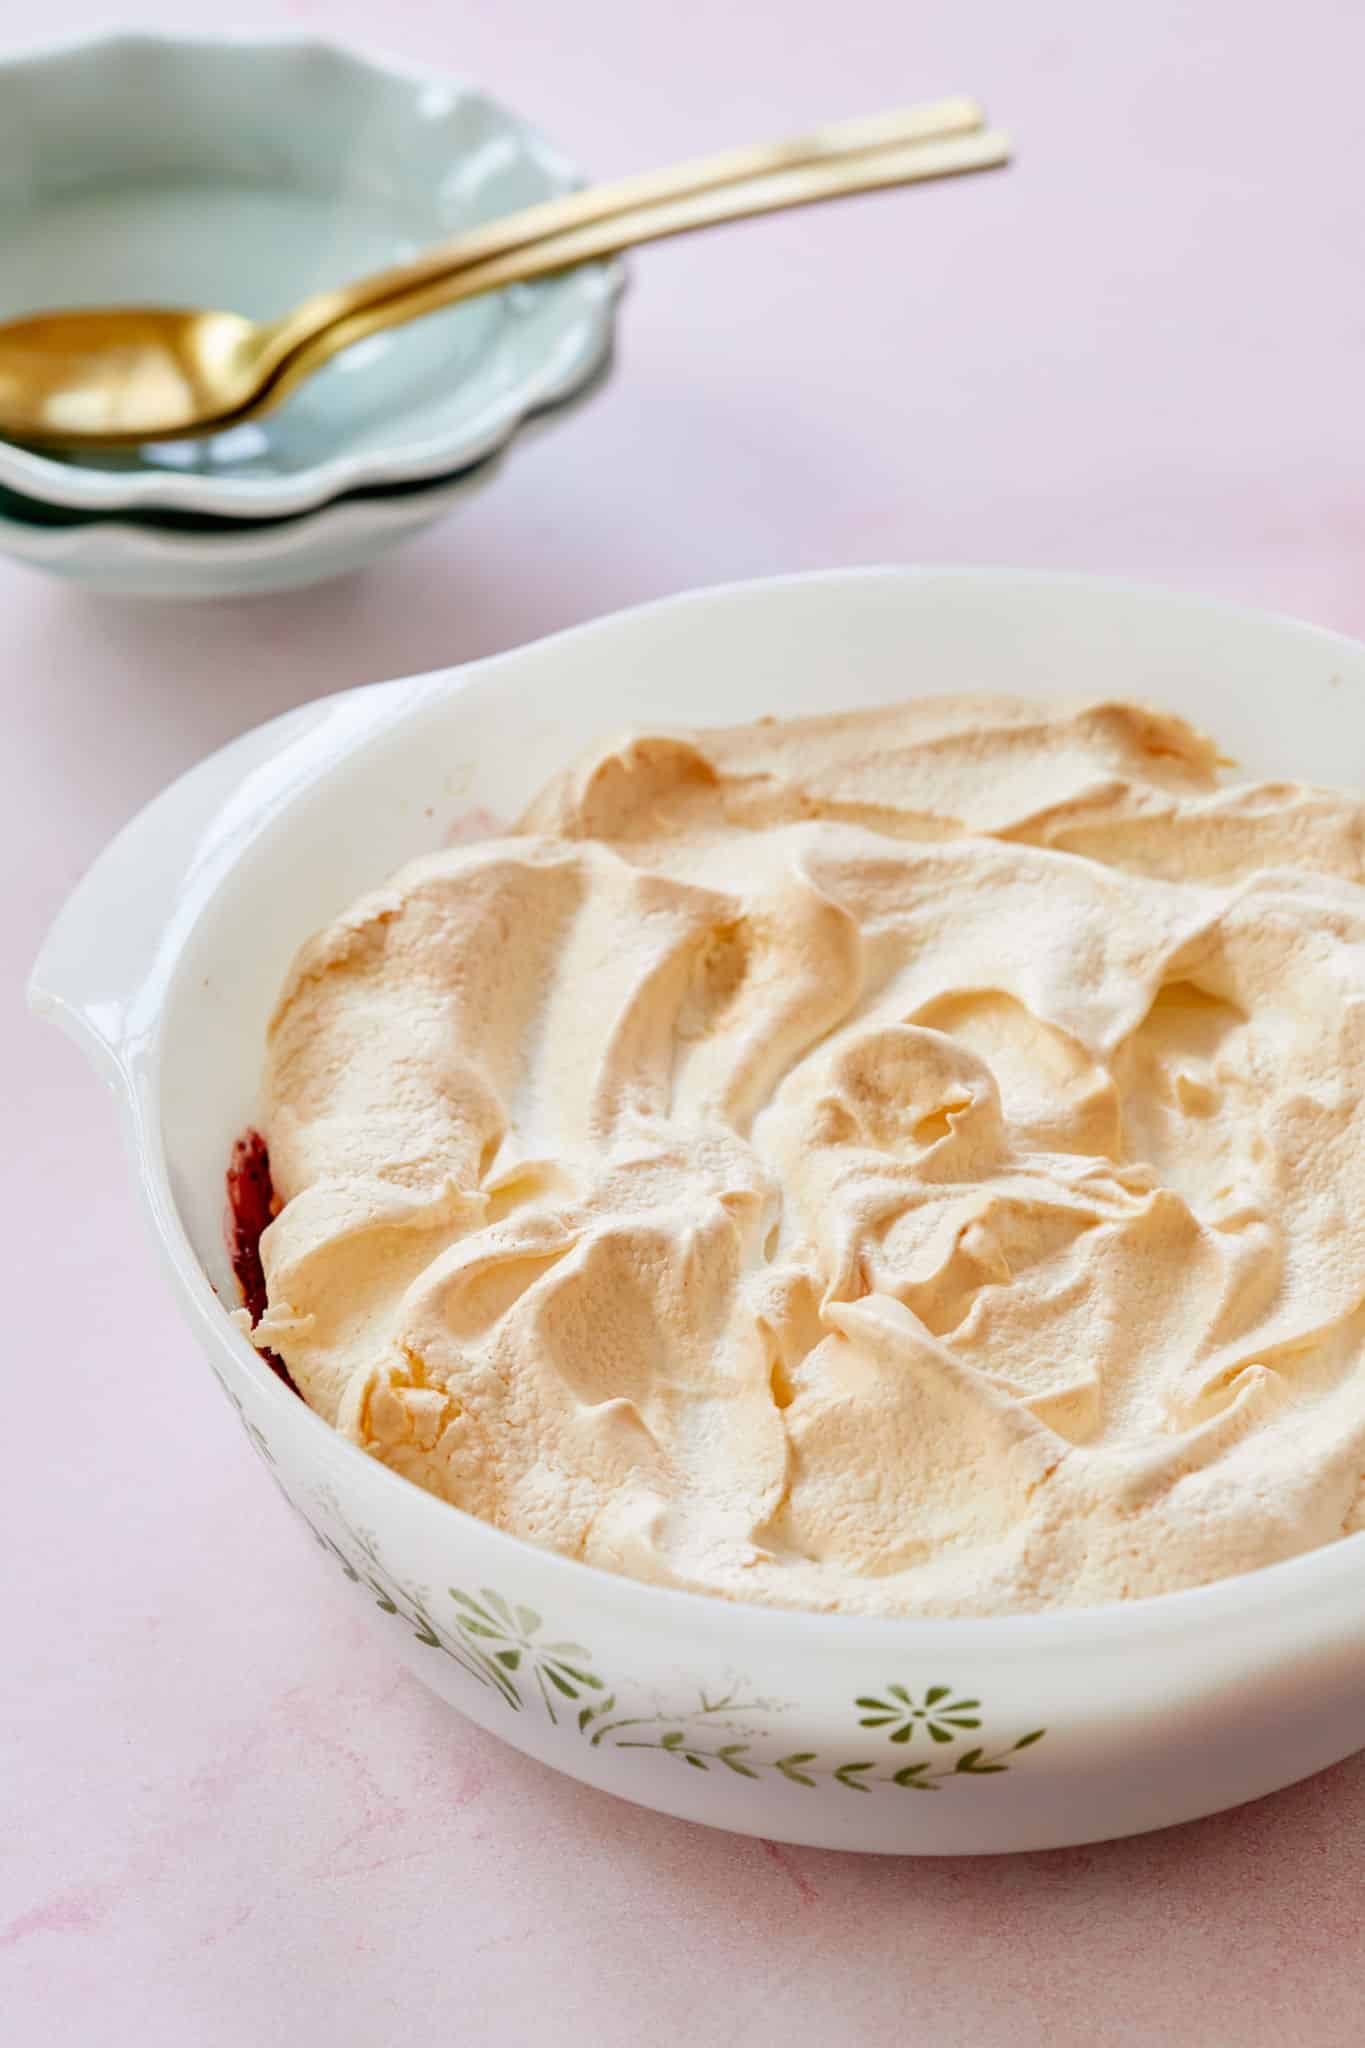 Queen of Puddings recipe topped with meringue.